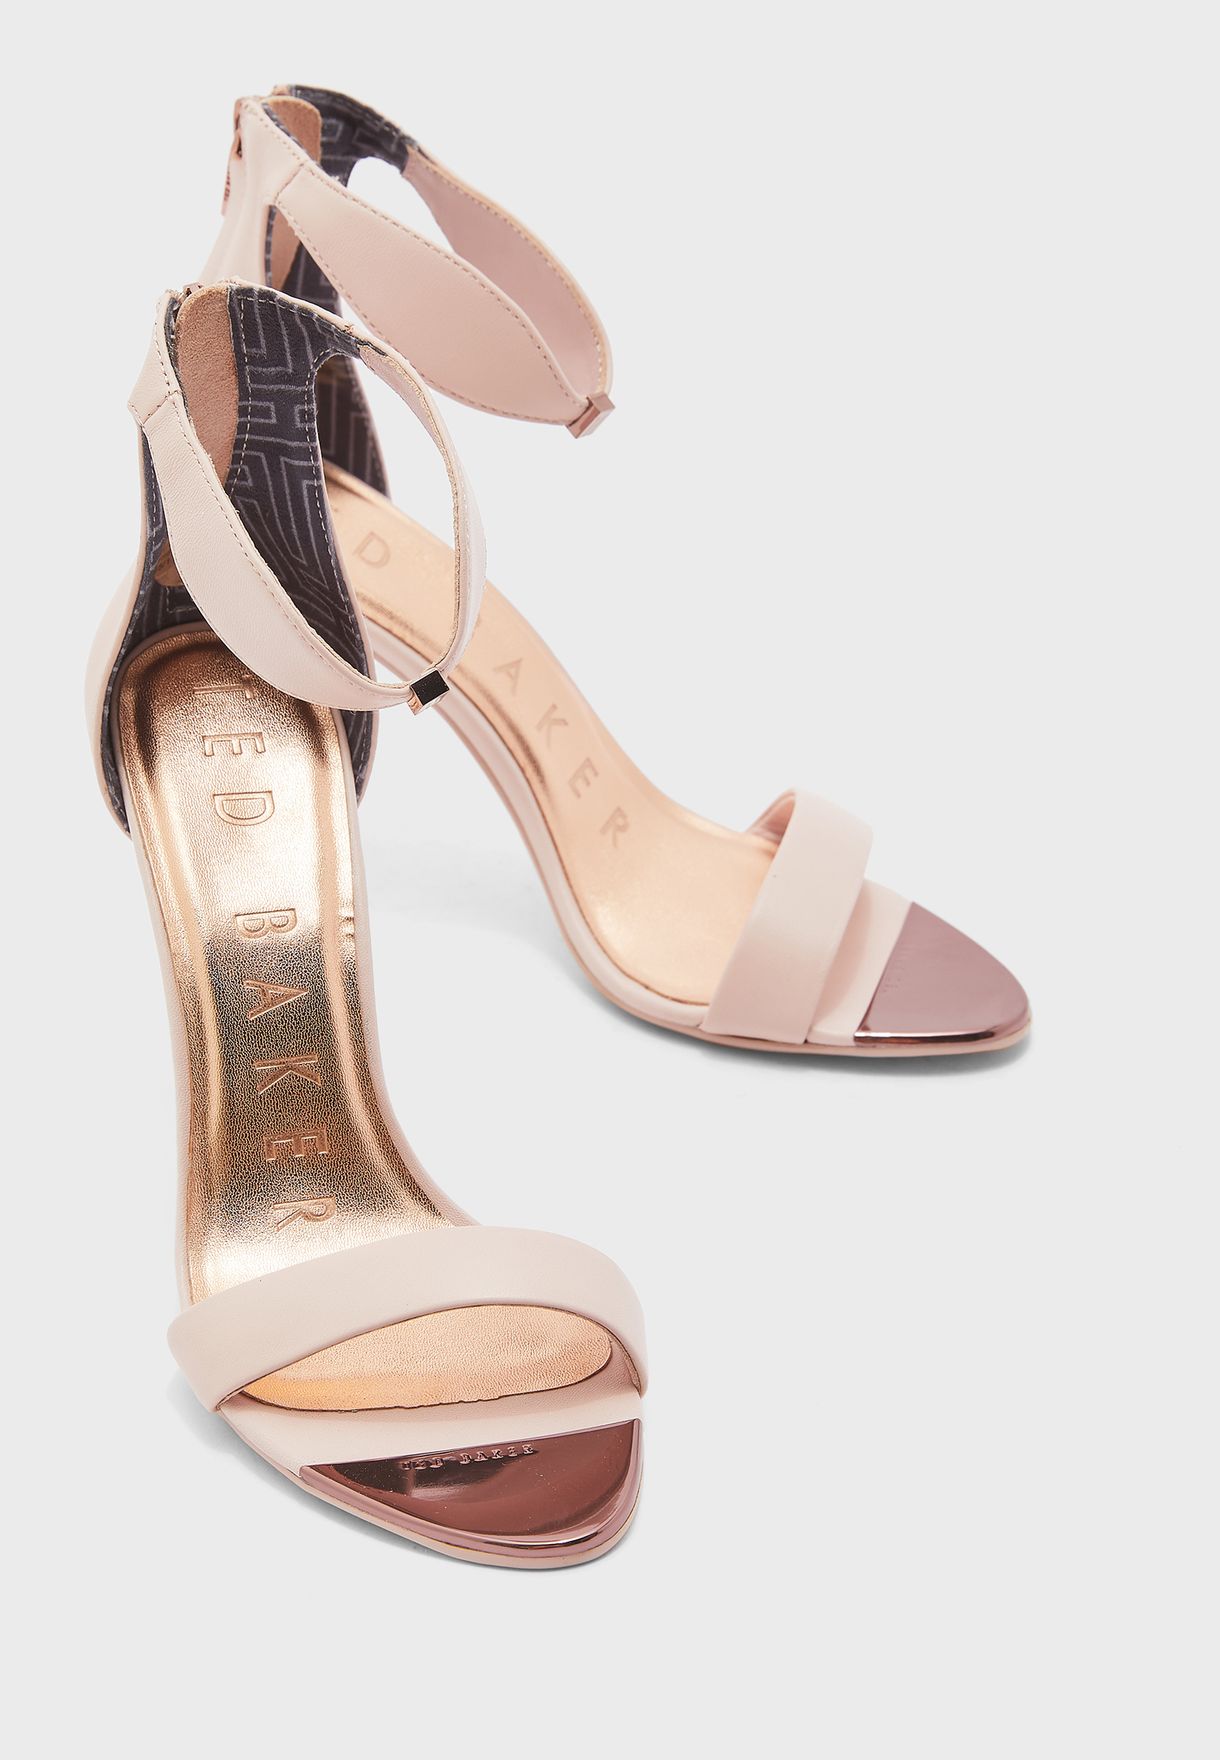 ted baker bow heels pink